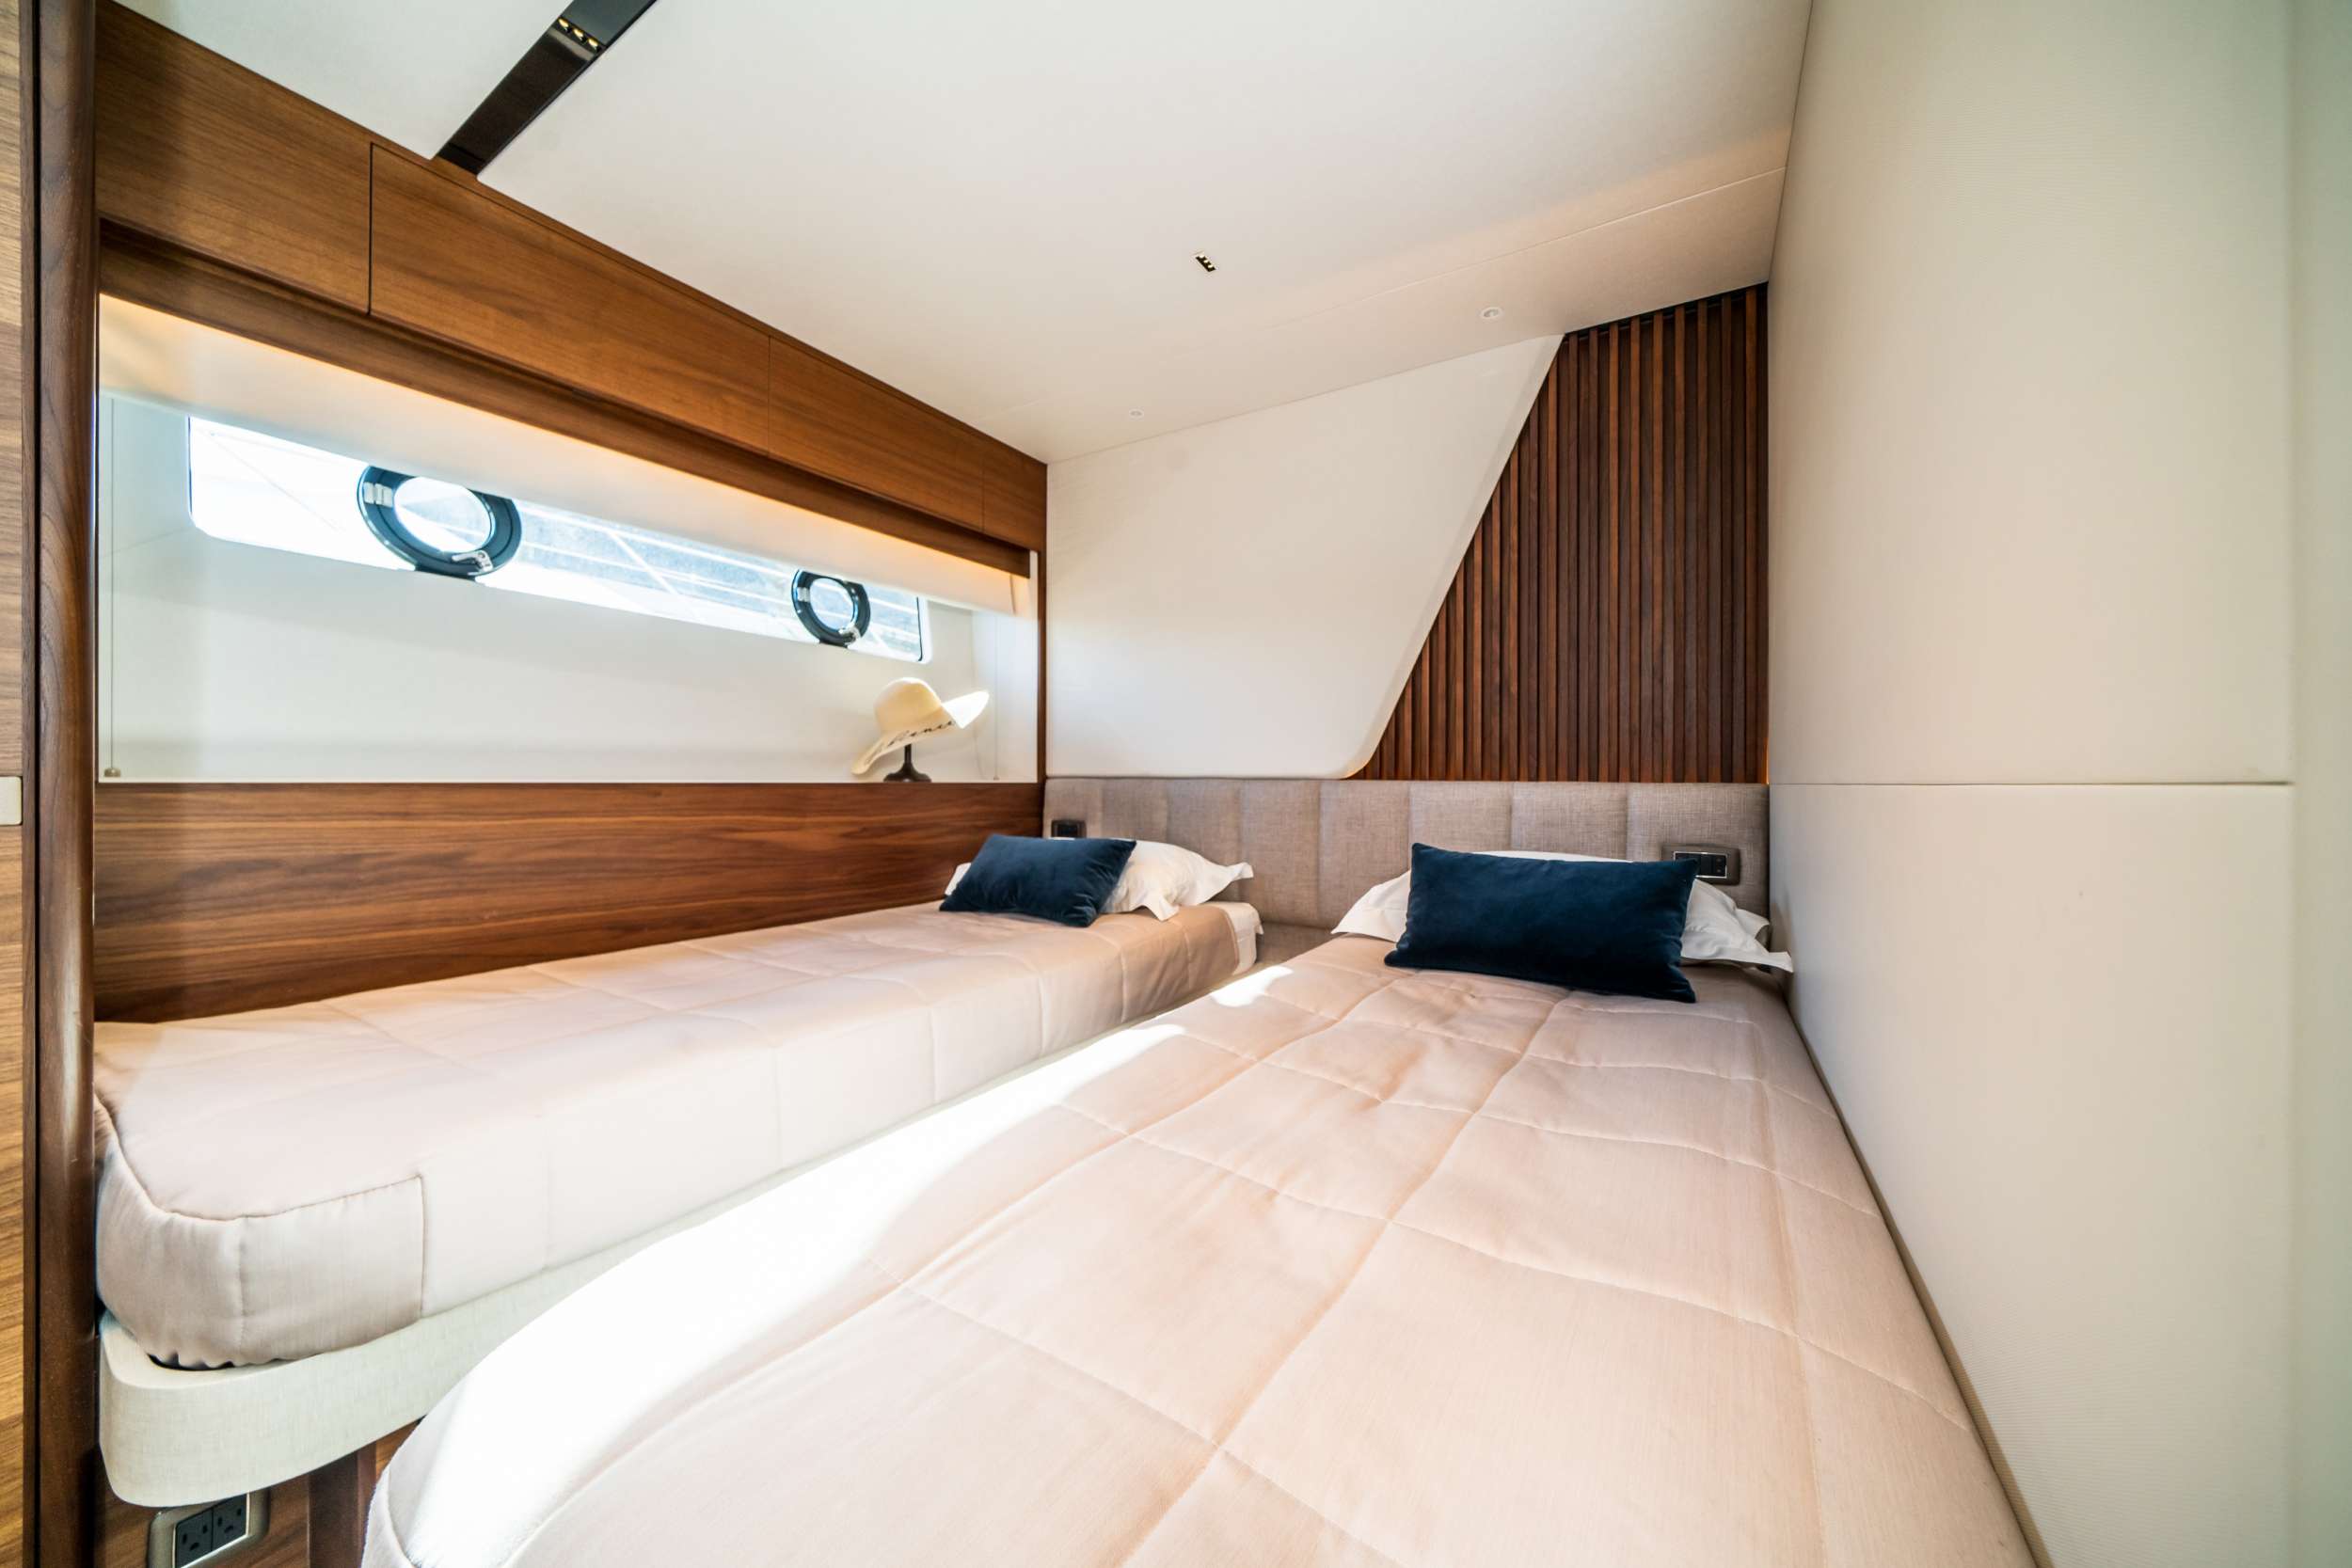 RECORD YEAR Yacht Charter - Port Twin Stateroom other